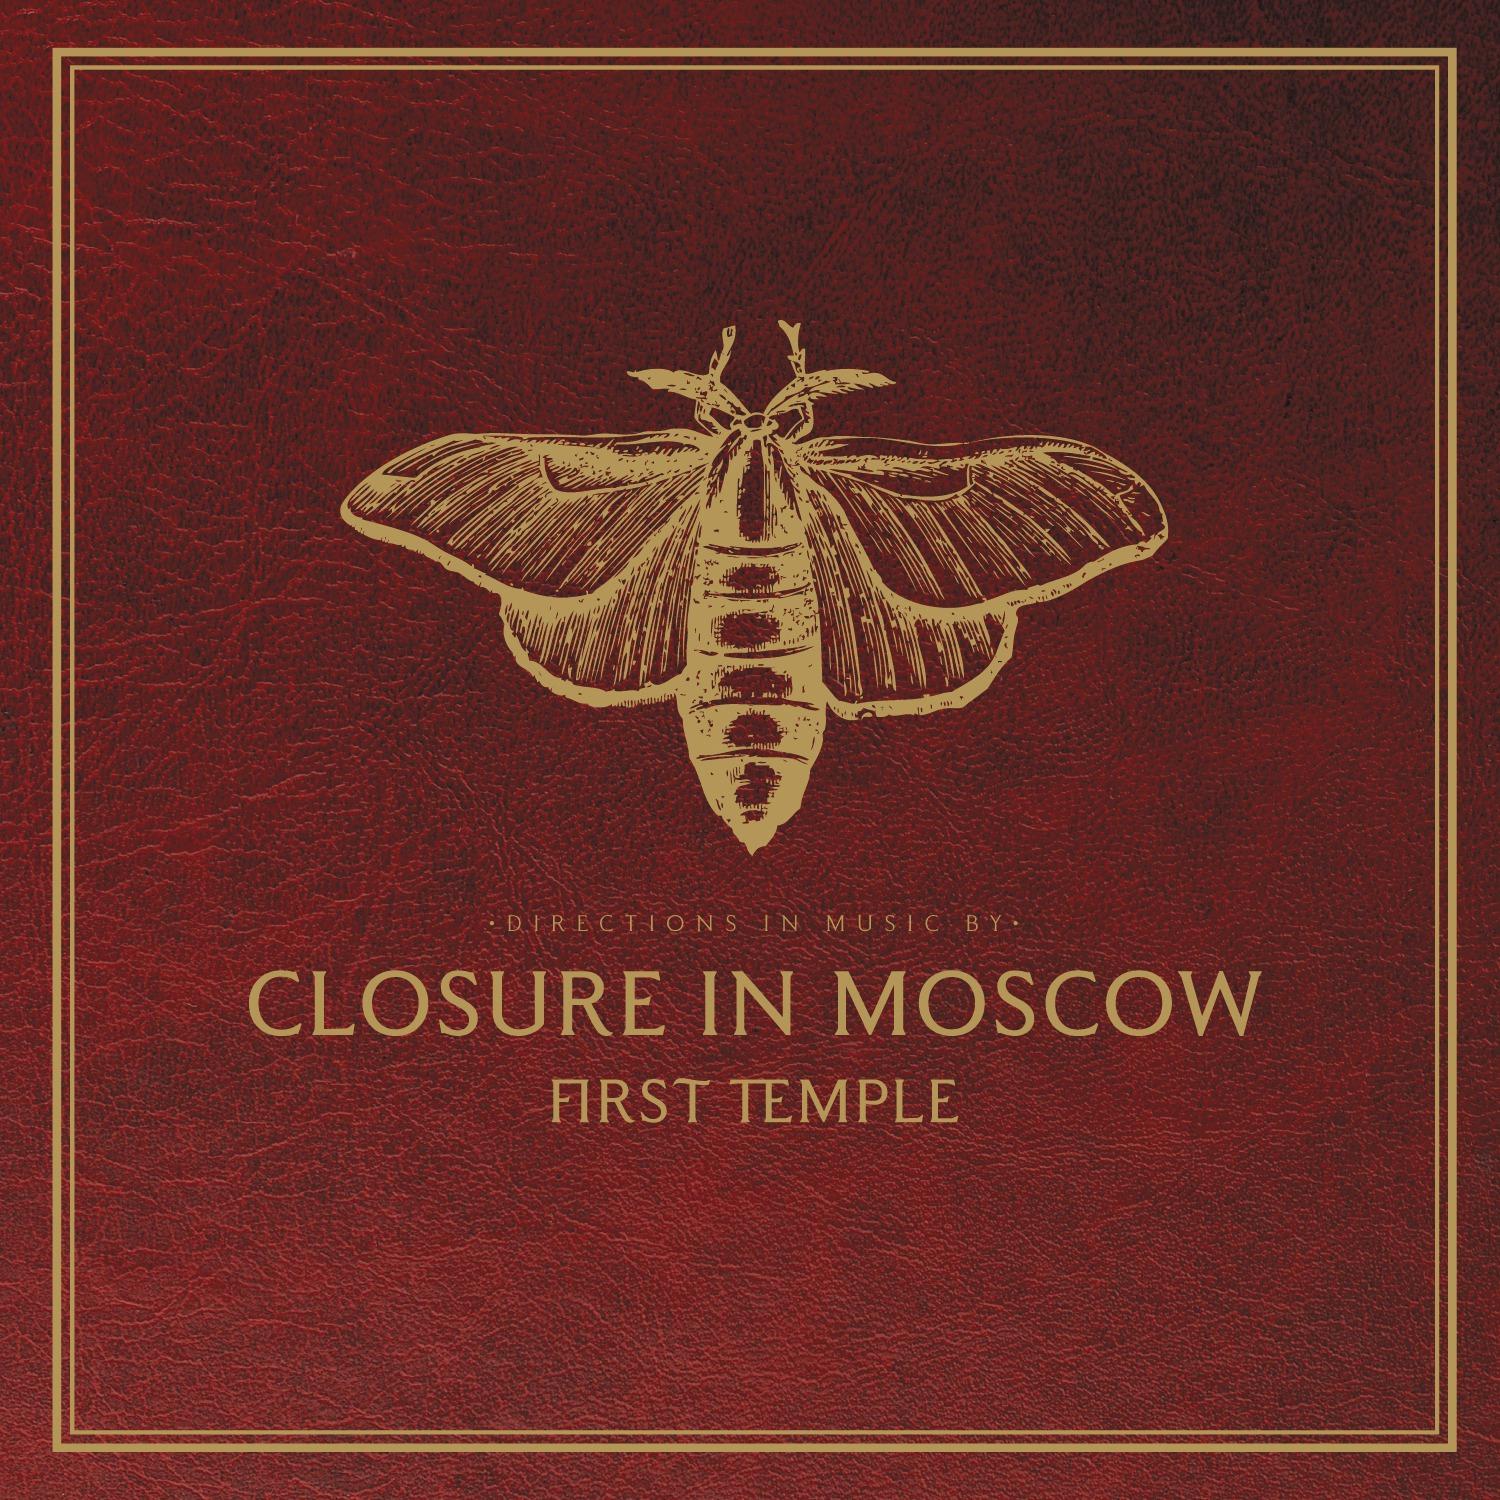 Closure in Moscow - Vanguard